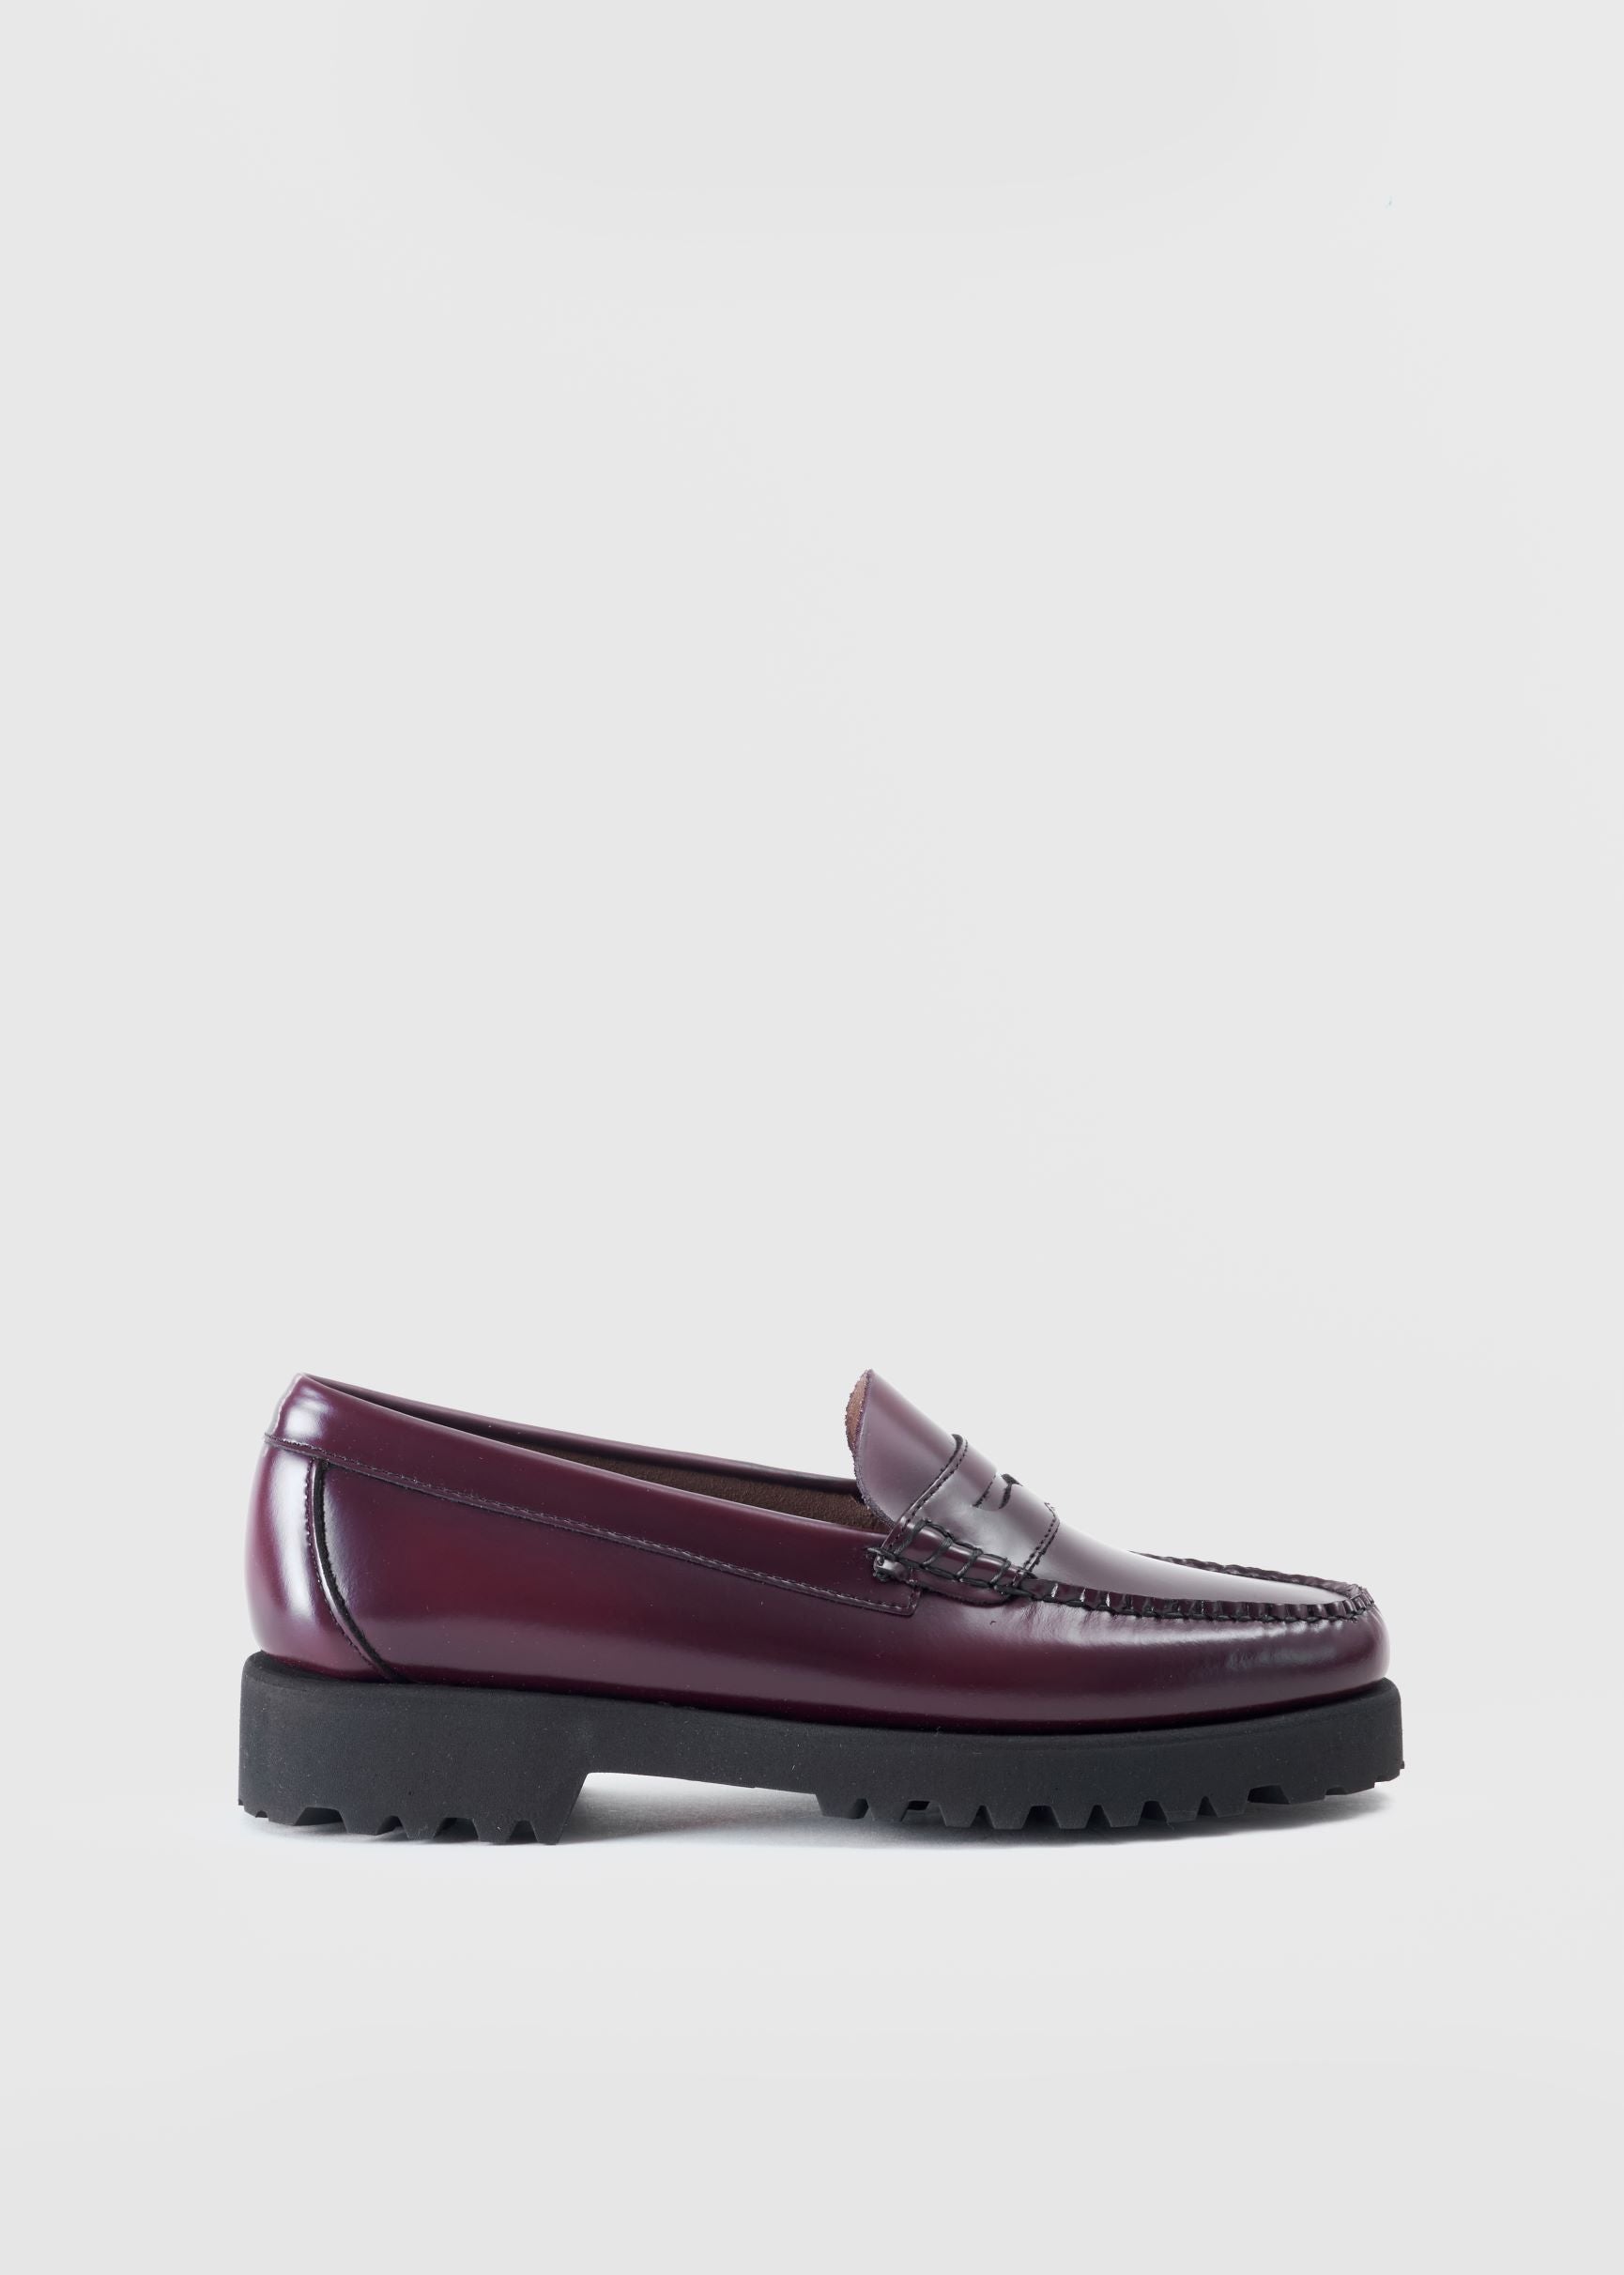 Image of G.H.Bass Womens Weejun 90's Penny Loafer With Chunky Sole In Wine